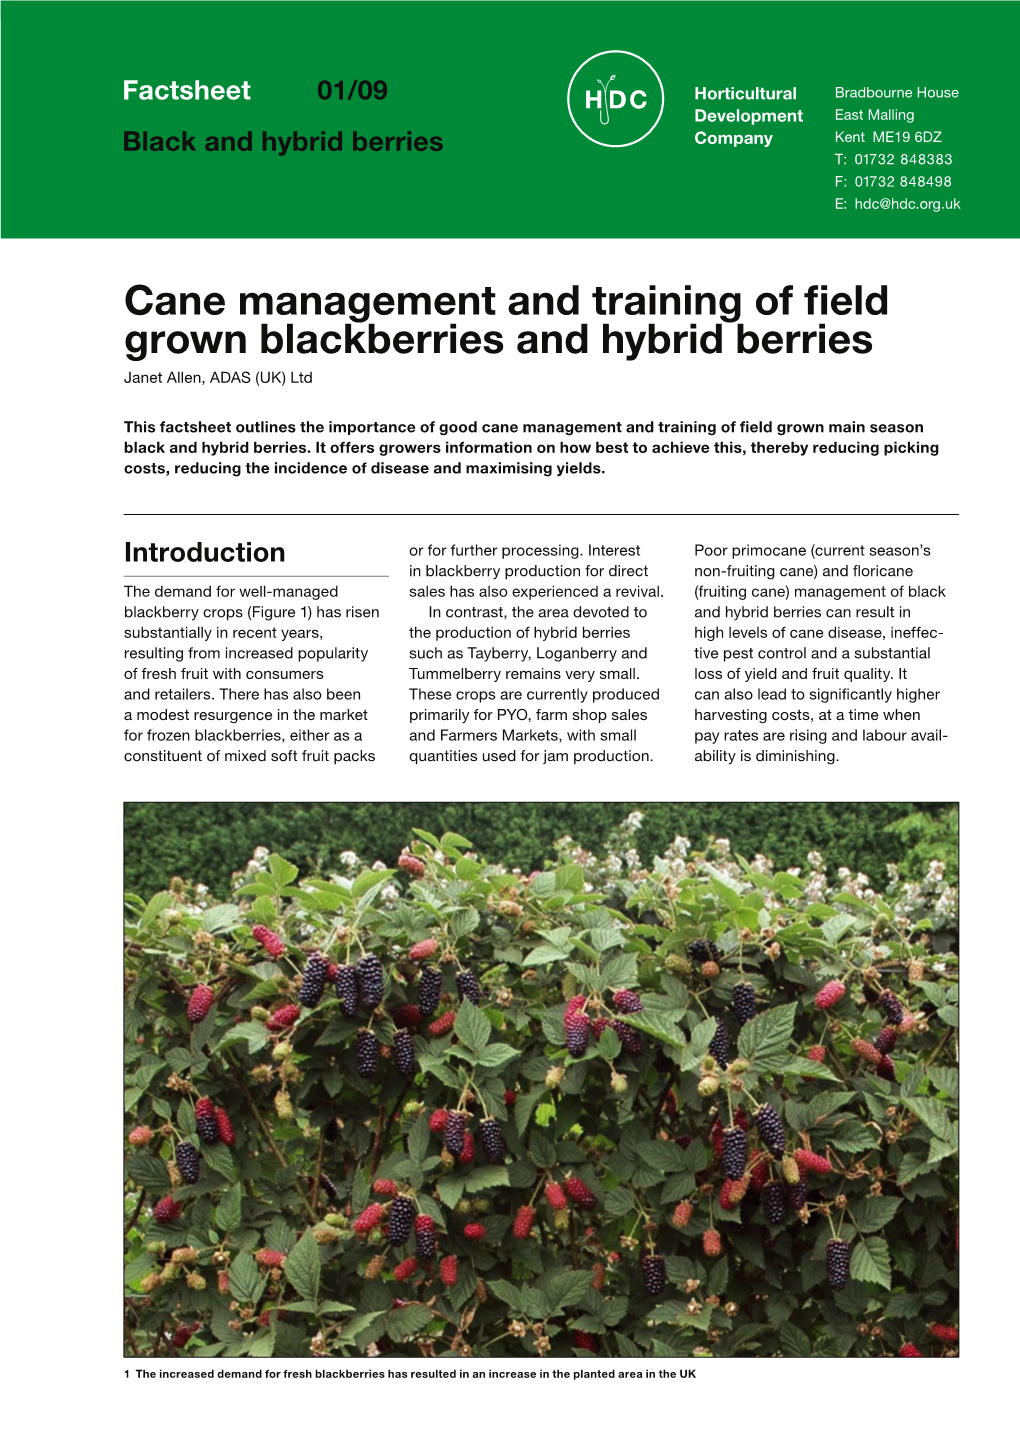 Cane Management and Training of ﬁeld Grown Blackberries and Hybrid Berries.Pdf